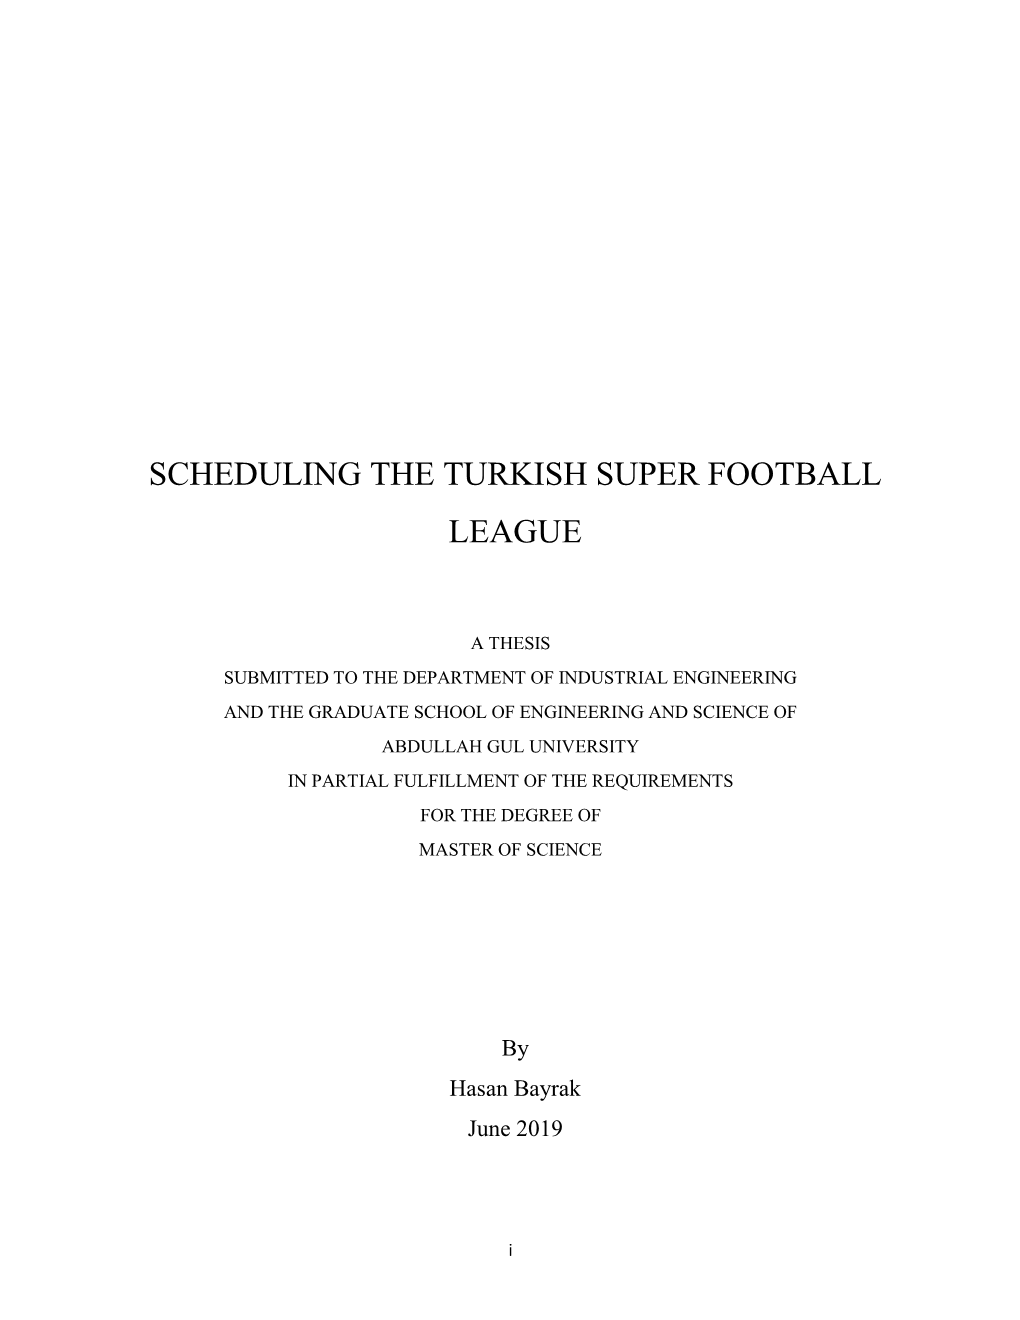 Scheduling the Turkish Super Football League